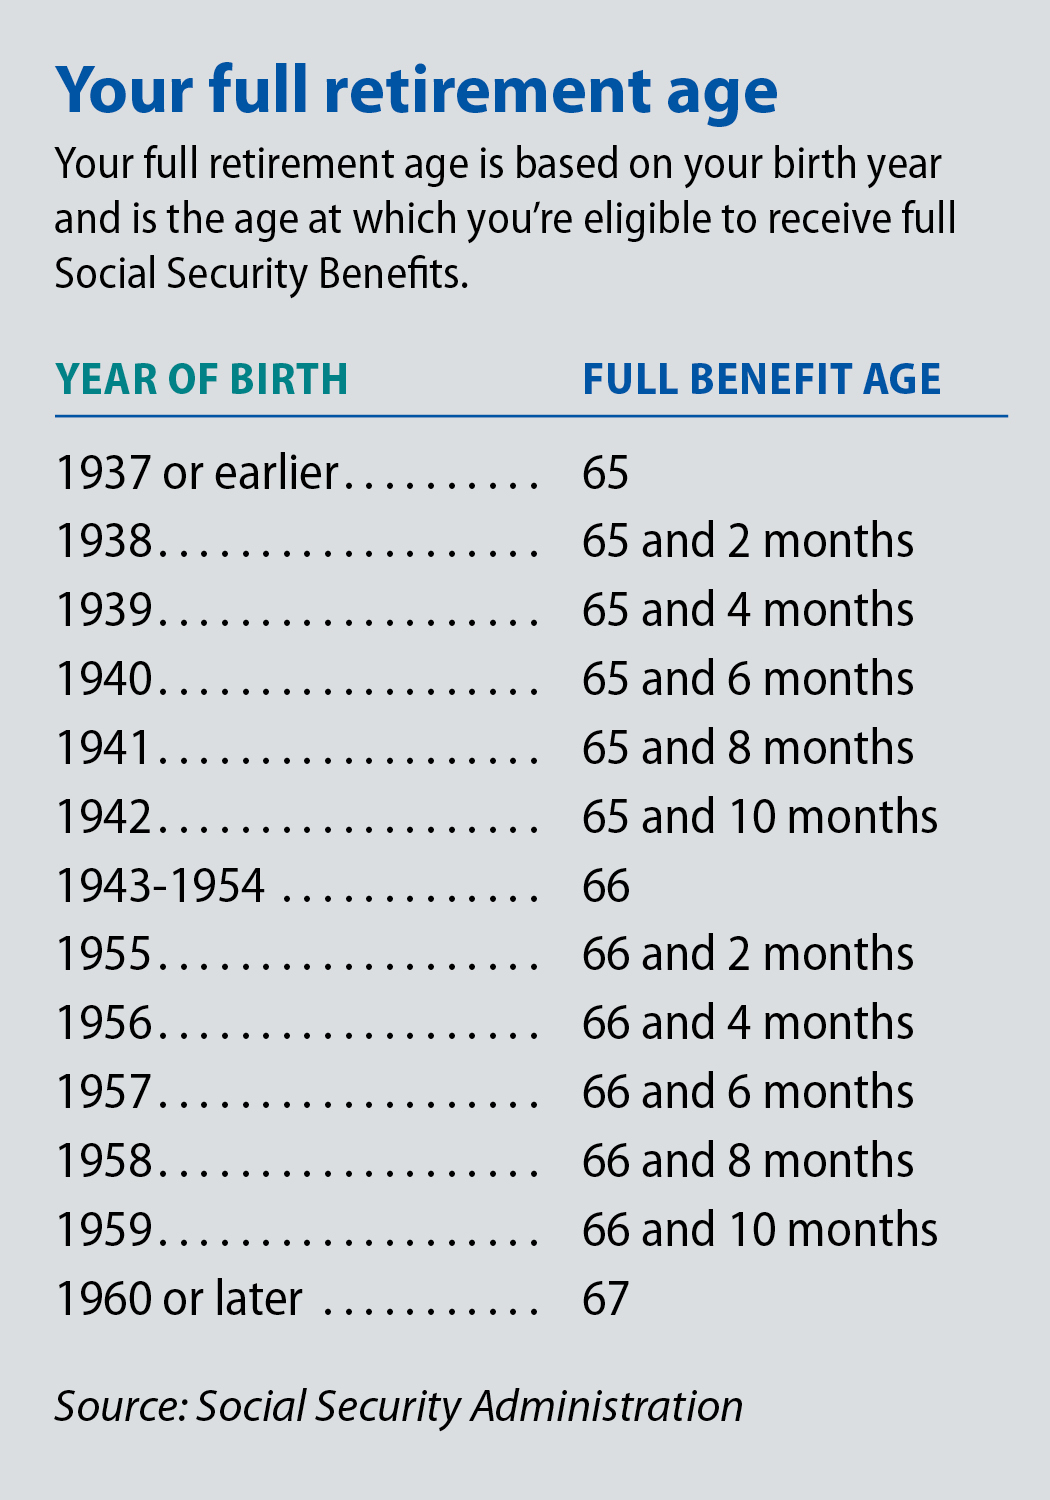 When to begin taking Social Security benefits - PlanMember